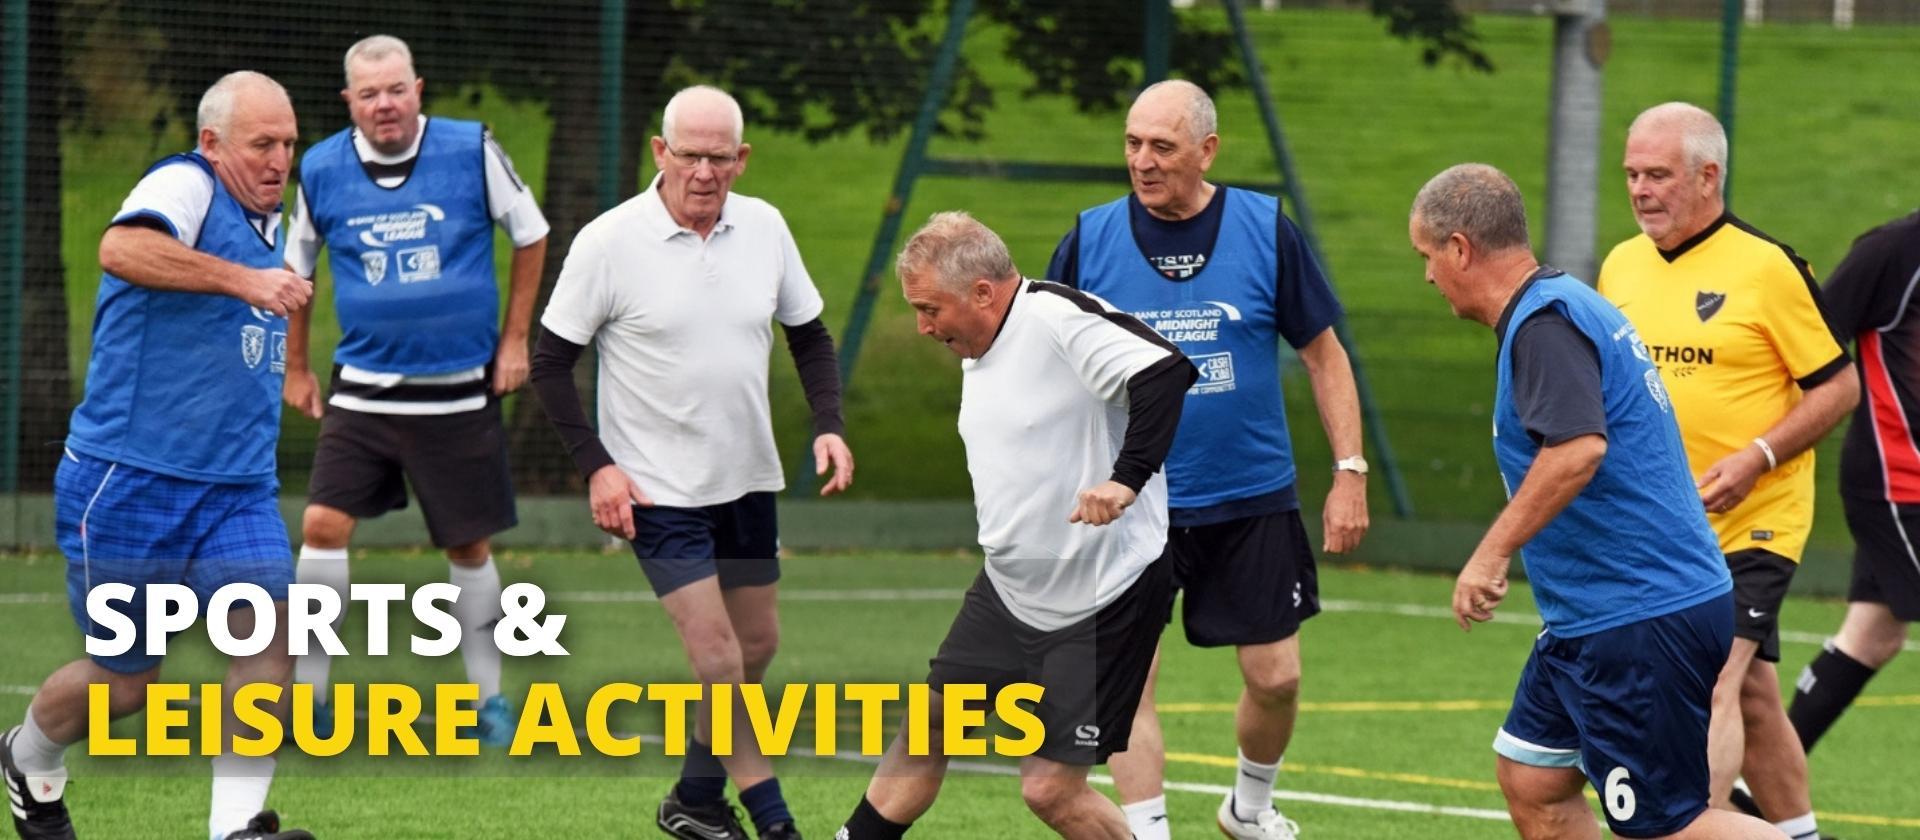 Sports and leisure activities